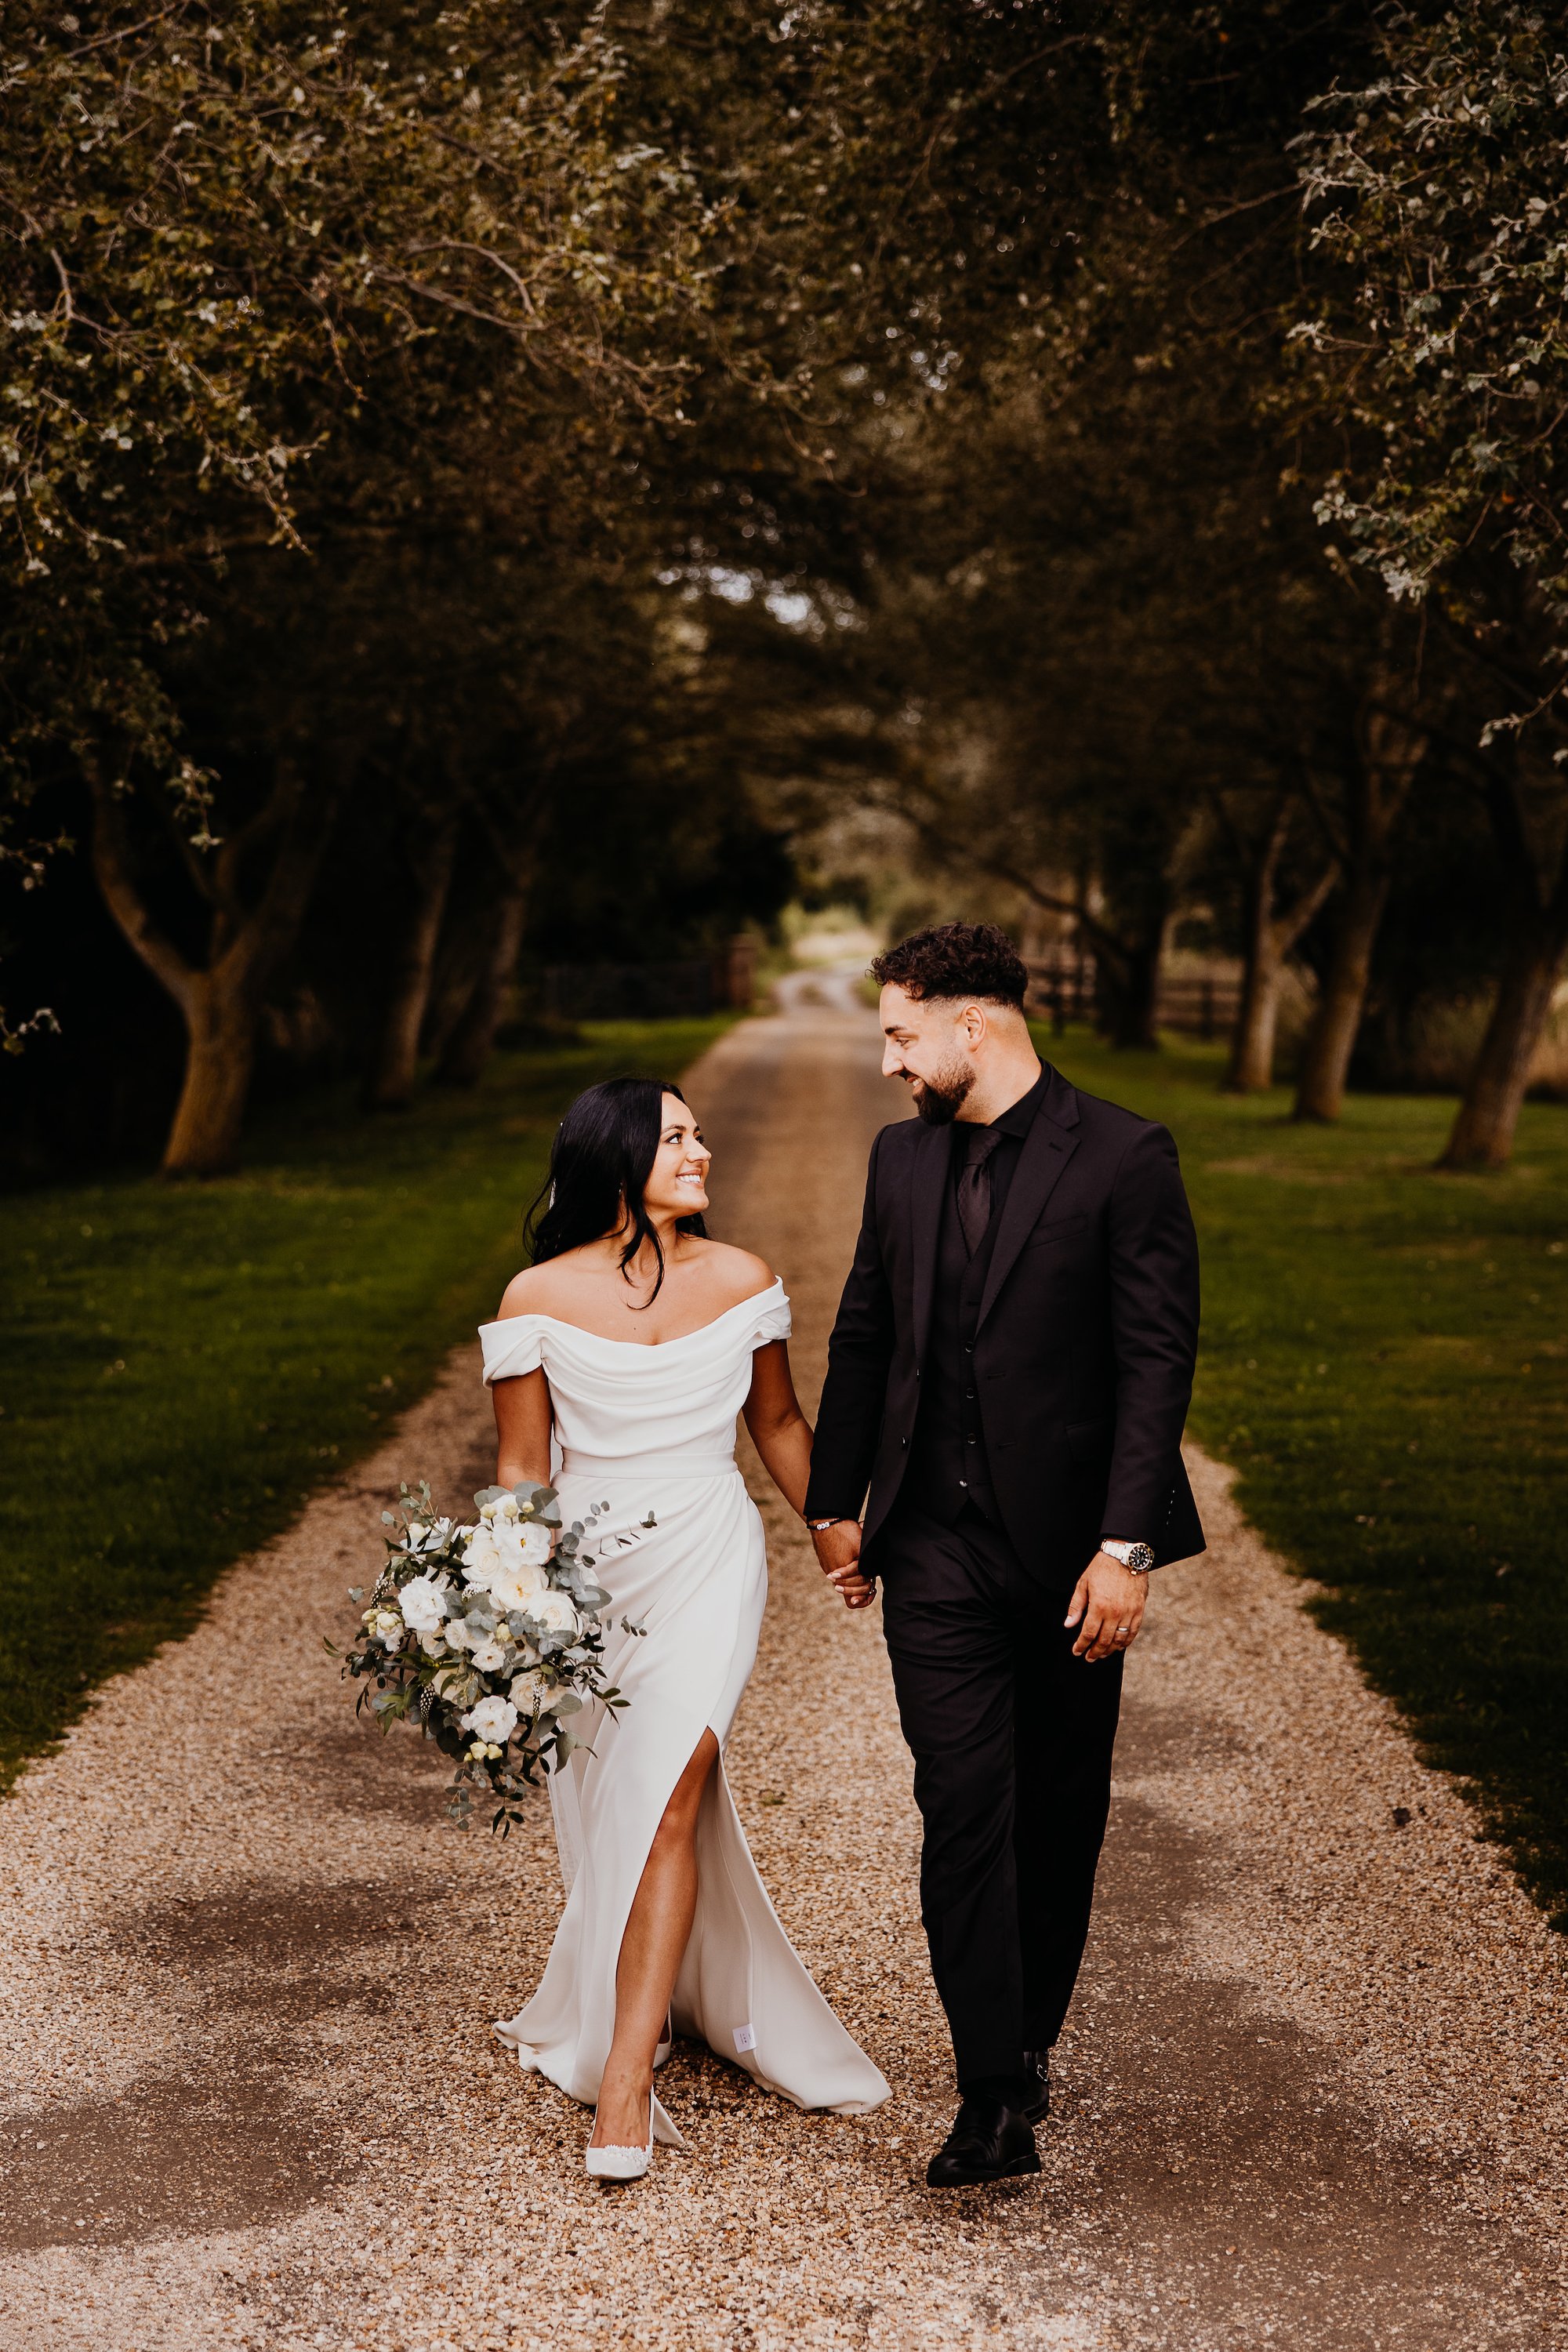 Beautiful bride Sophie wears the Okotan corset and long Okotan skirt | Wedding dresses and separates by Halfpenny London